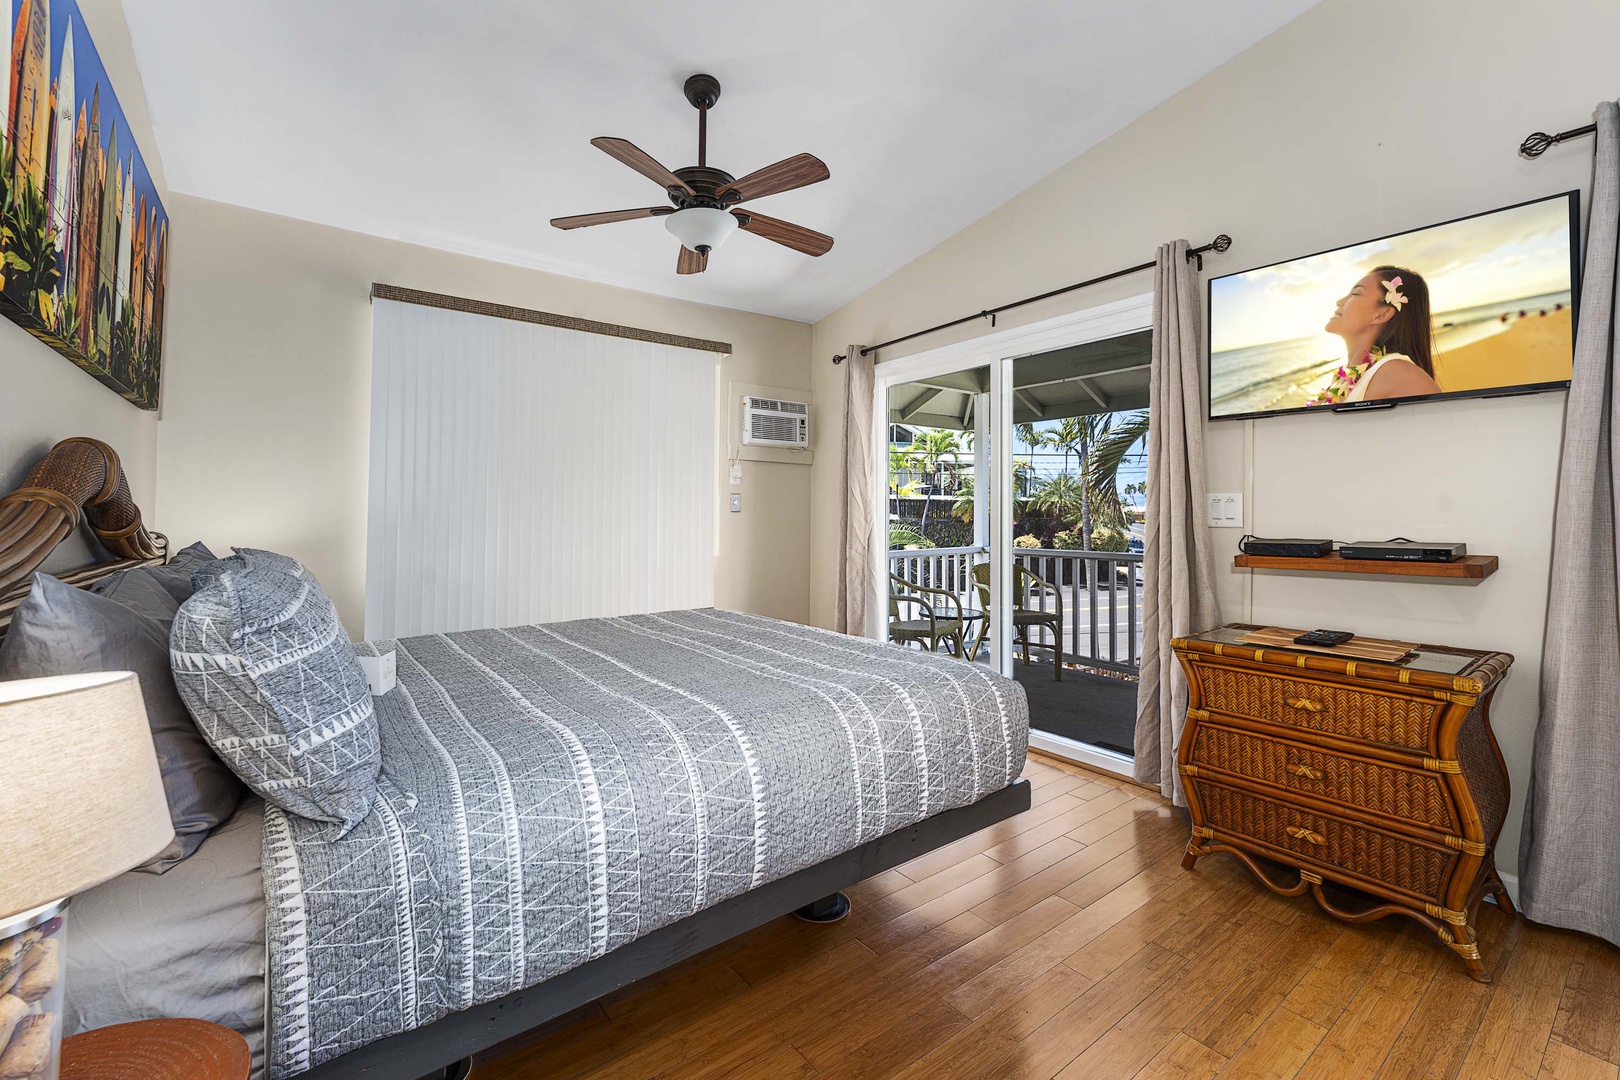 Kailua Kona Vacation Rentals, Hale A Kai - Smart TV, Lanai access and ensuite are just some of the features